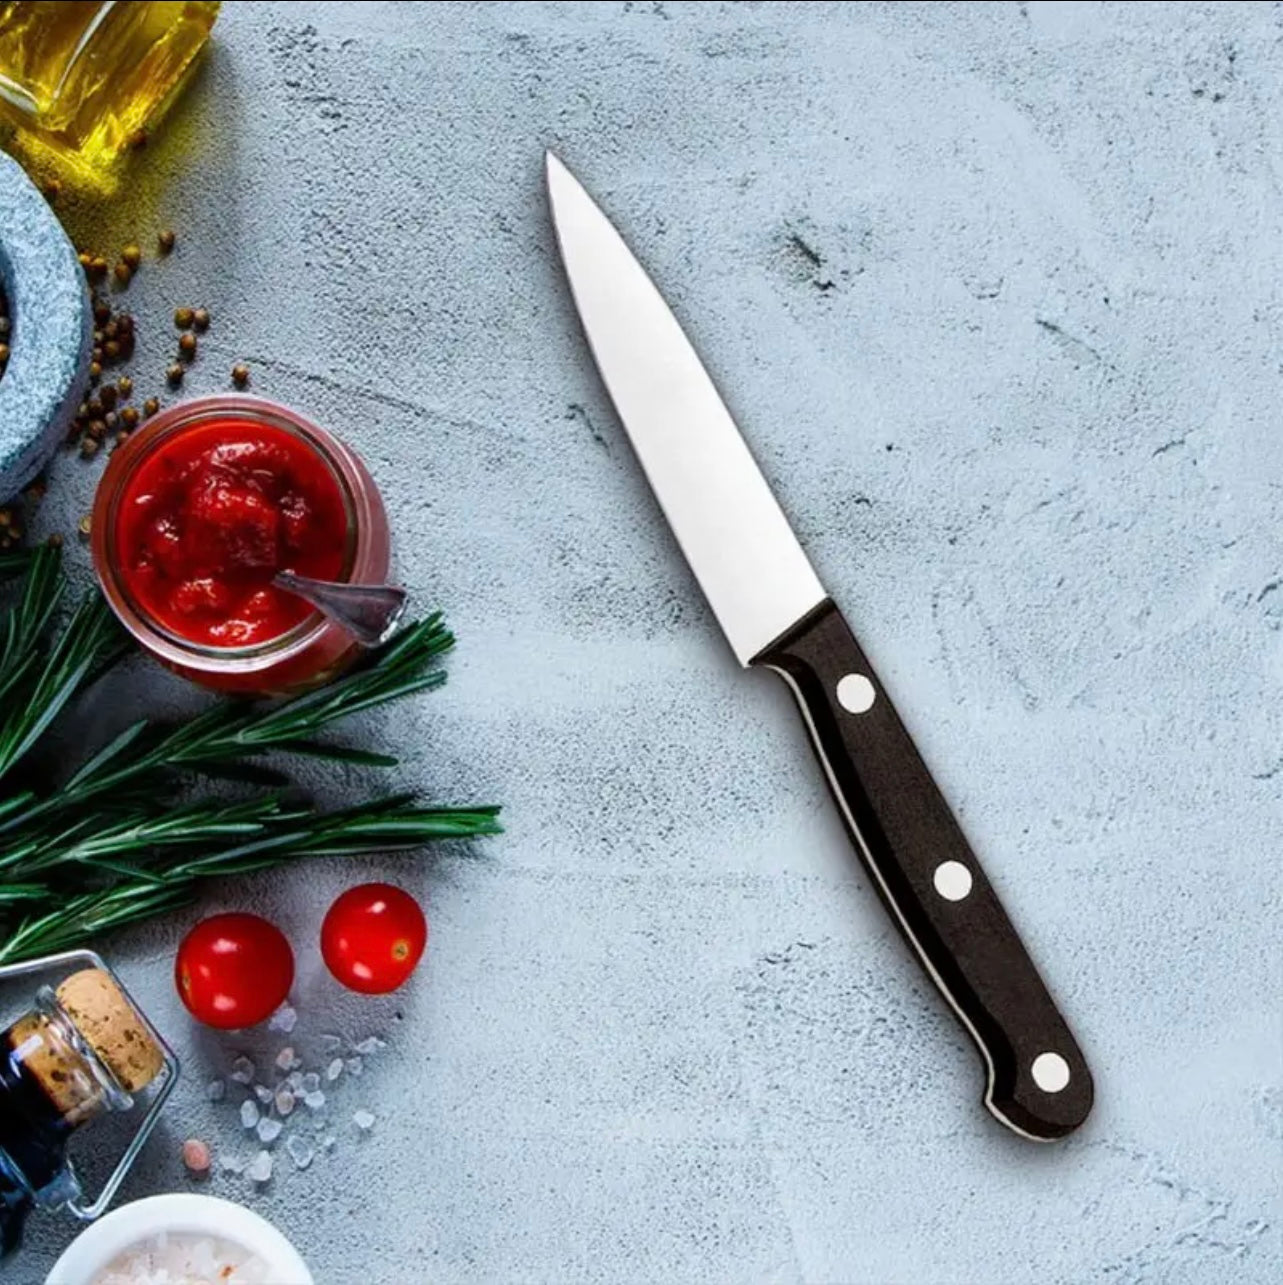 Black Paring Knife – Professional Kitchen Knife for Fruits and Vegetables –  Black Oxidated Premium Stainless Steel Fruit Knife with Ergonomic Handle –